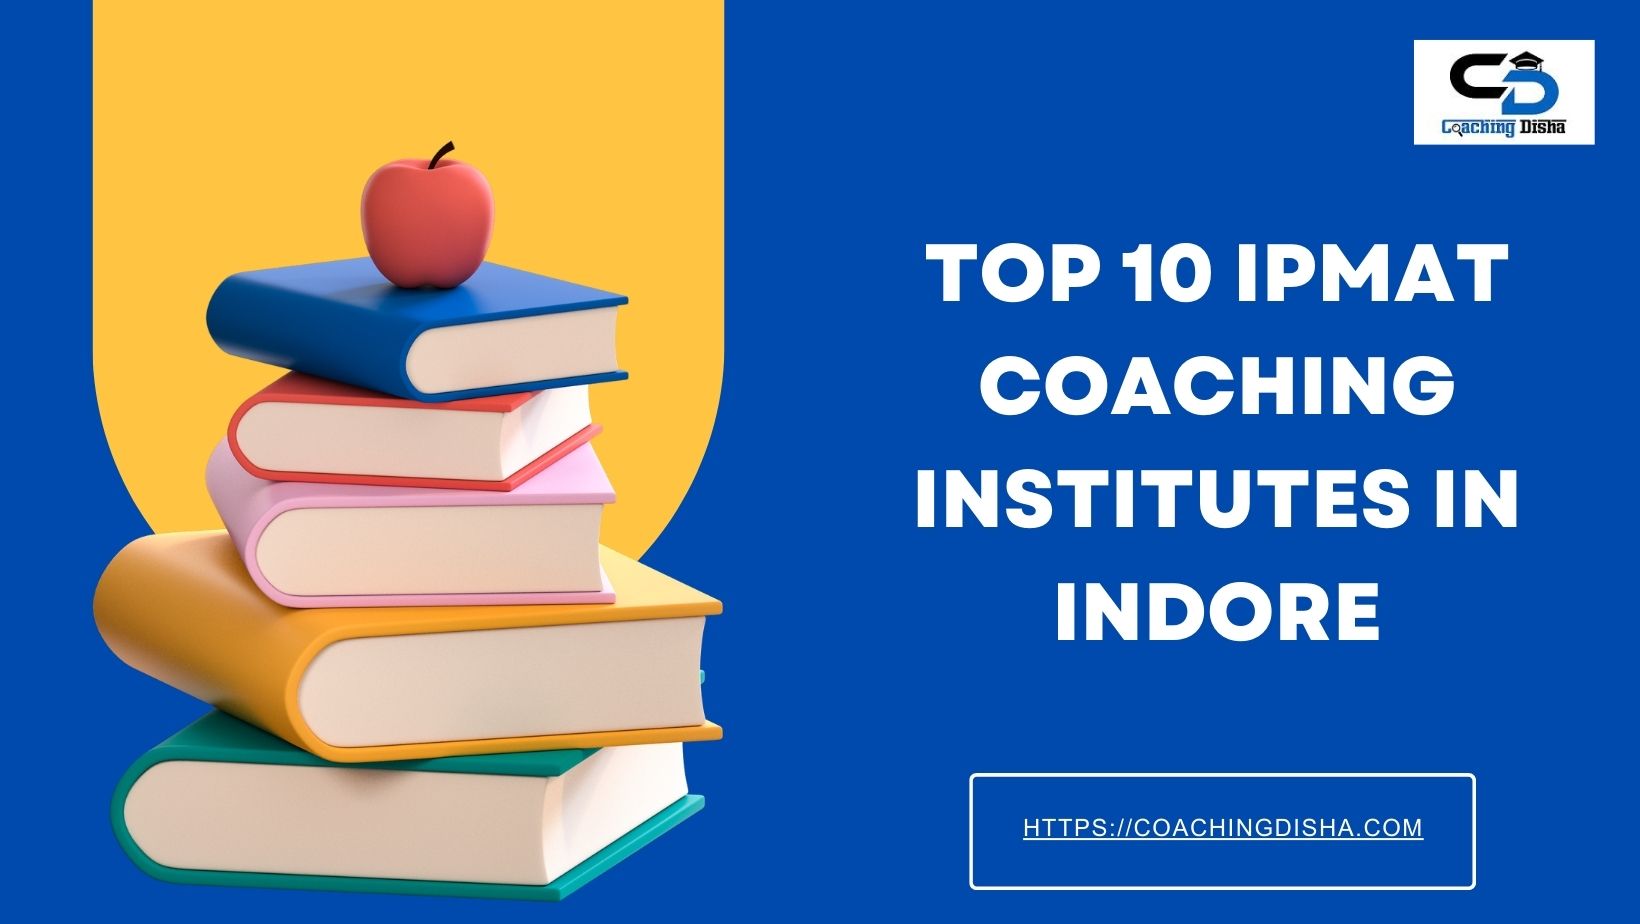 Test 10 IPMAT Coaching Institutes in Indore: Fees, Contact Details